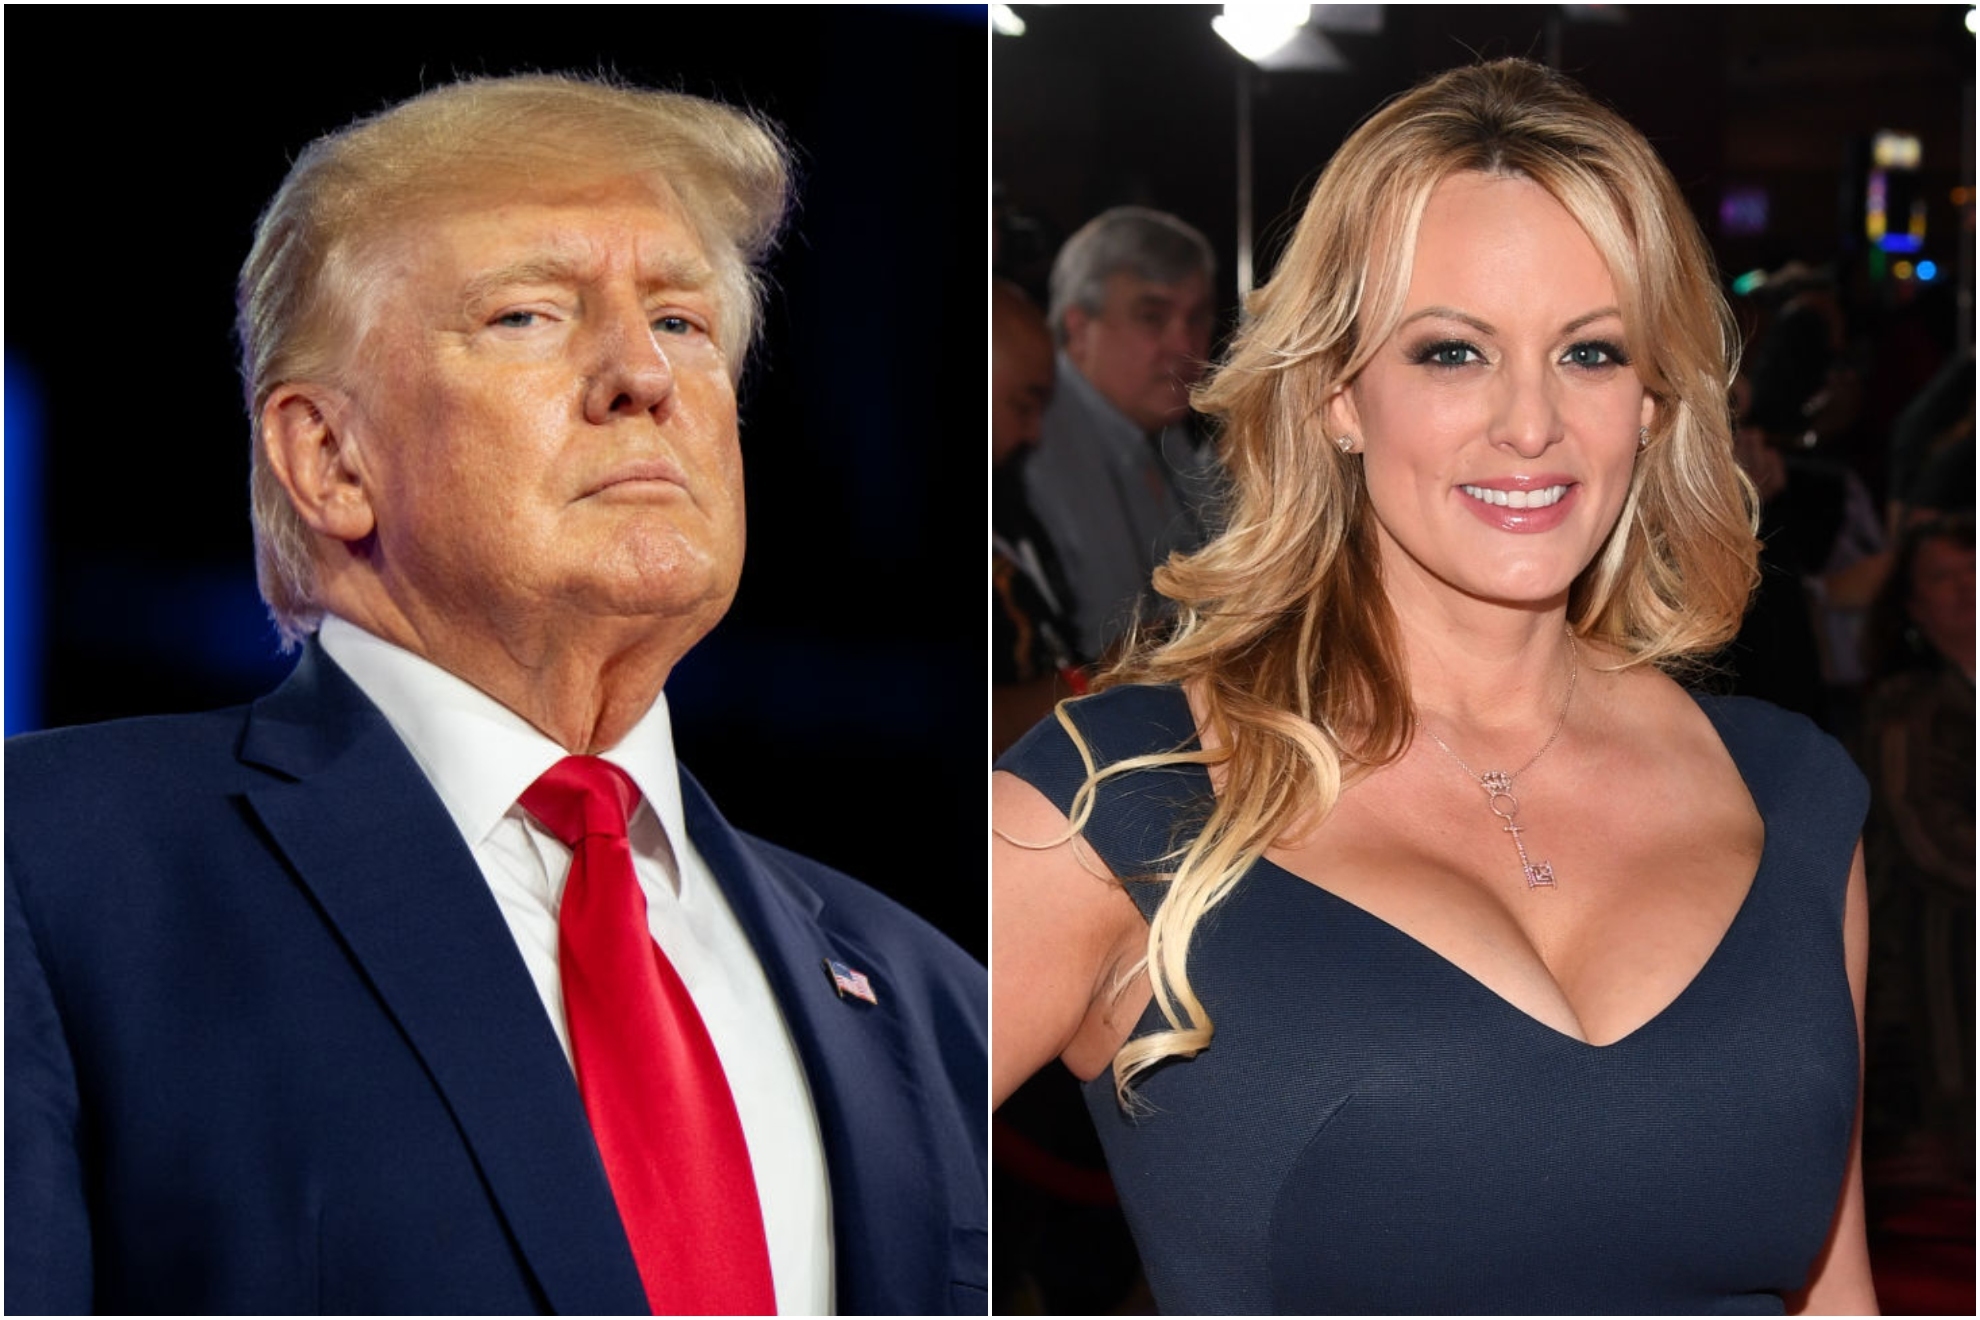 Donald Trump and Stormy Daniels.